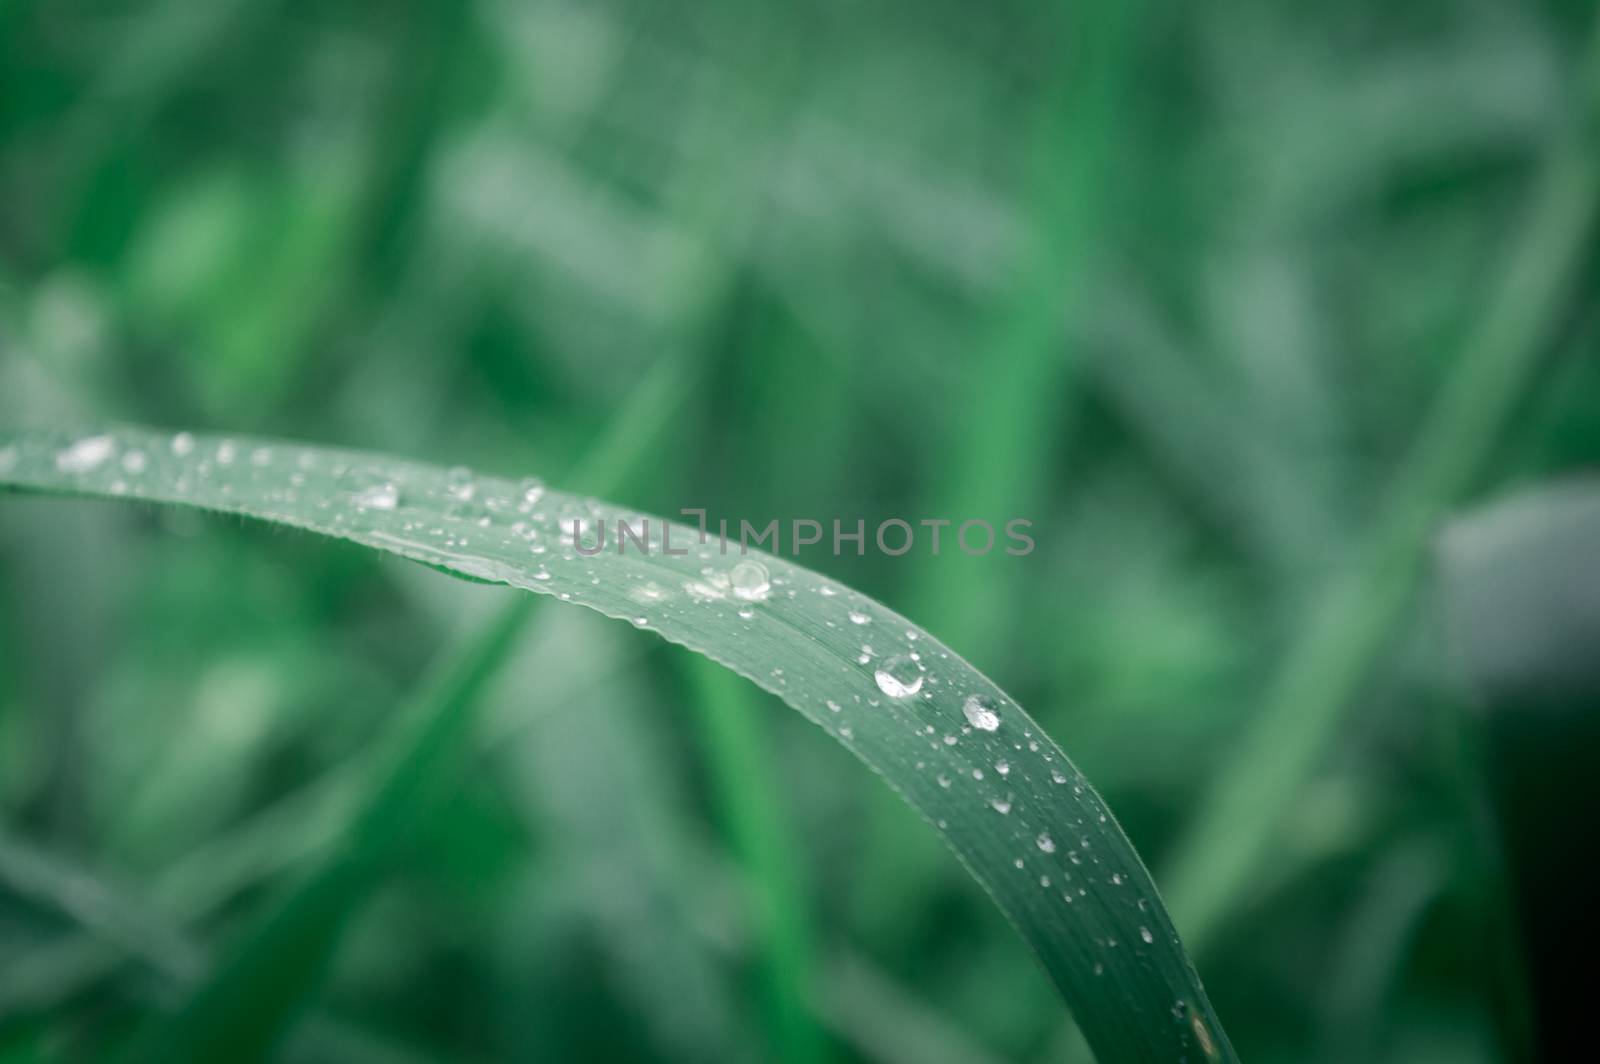 Raindrops on leaf. Rain drop on Leaves. Extreme Close up of rain water dew droplets on blade of grass. Sunlight reflection. Winter rainy season. Beauty in nature abstract background. Macro photography by sudiptabhowmick